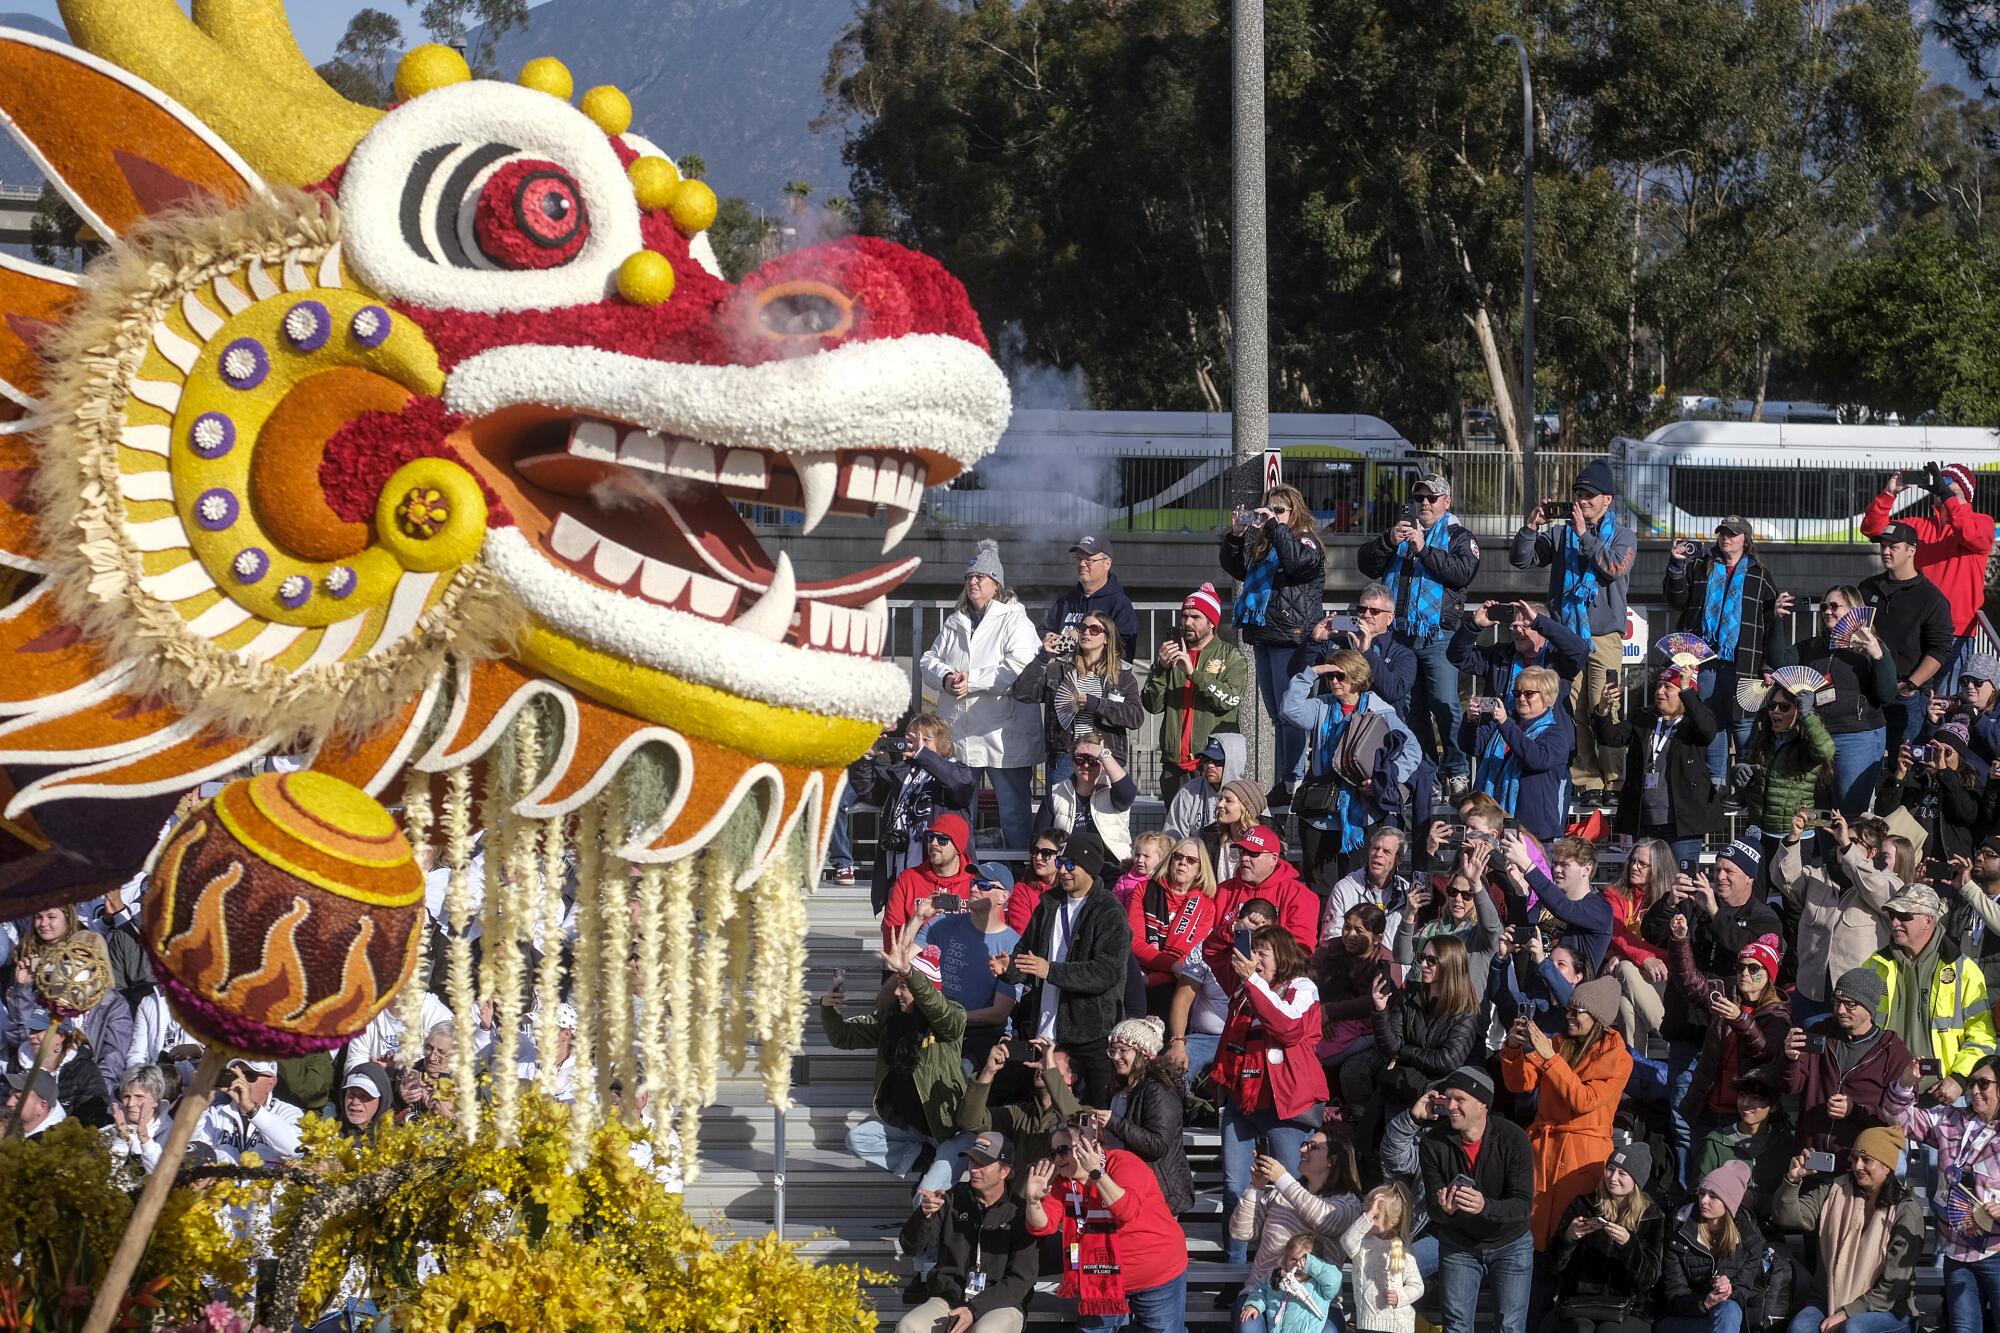 A large dragon head on a Rose Parade float.